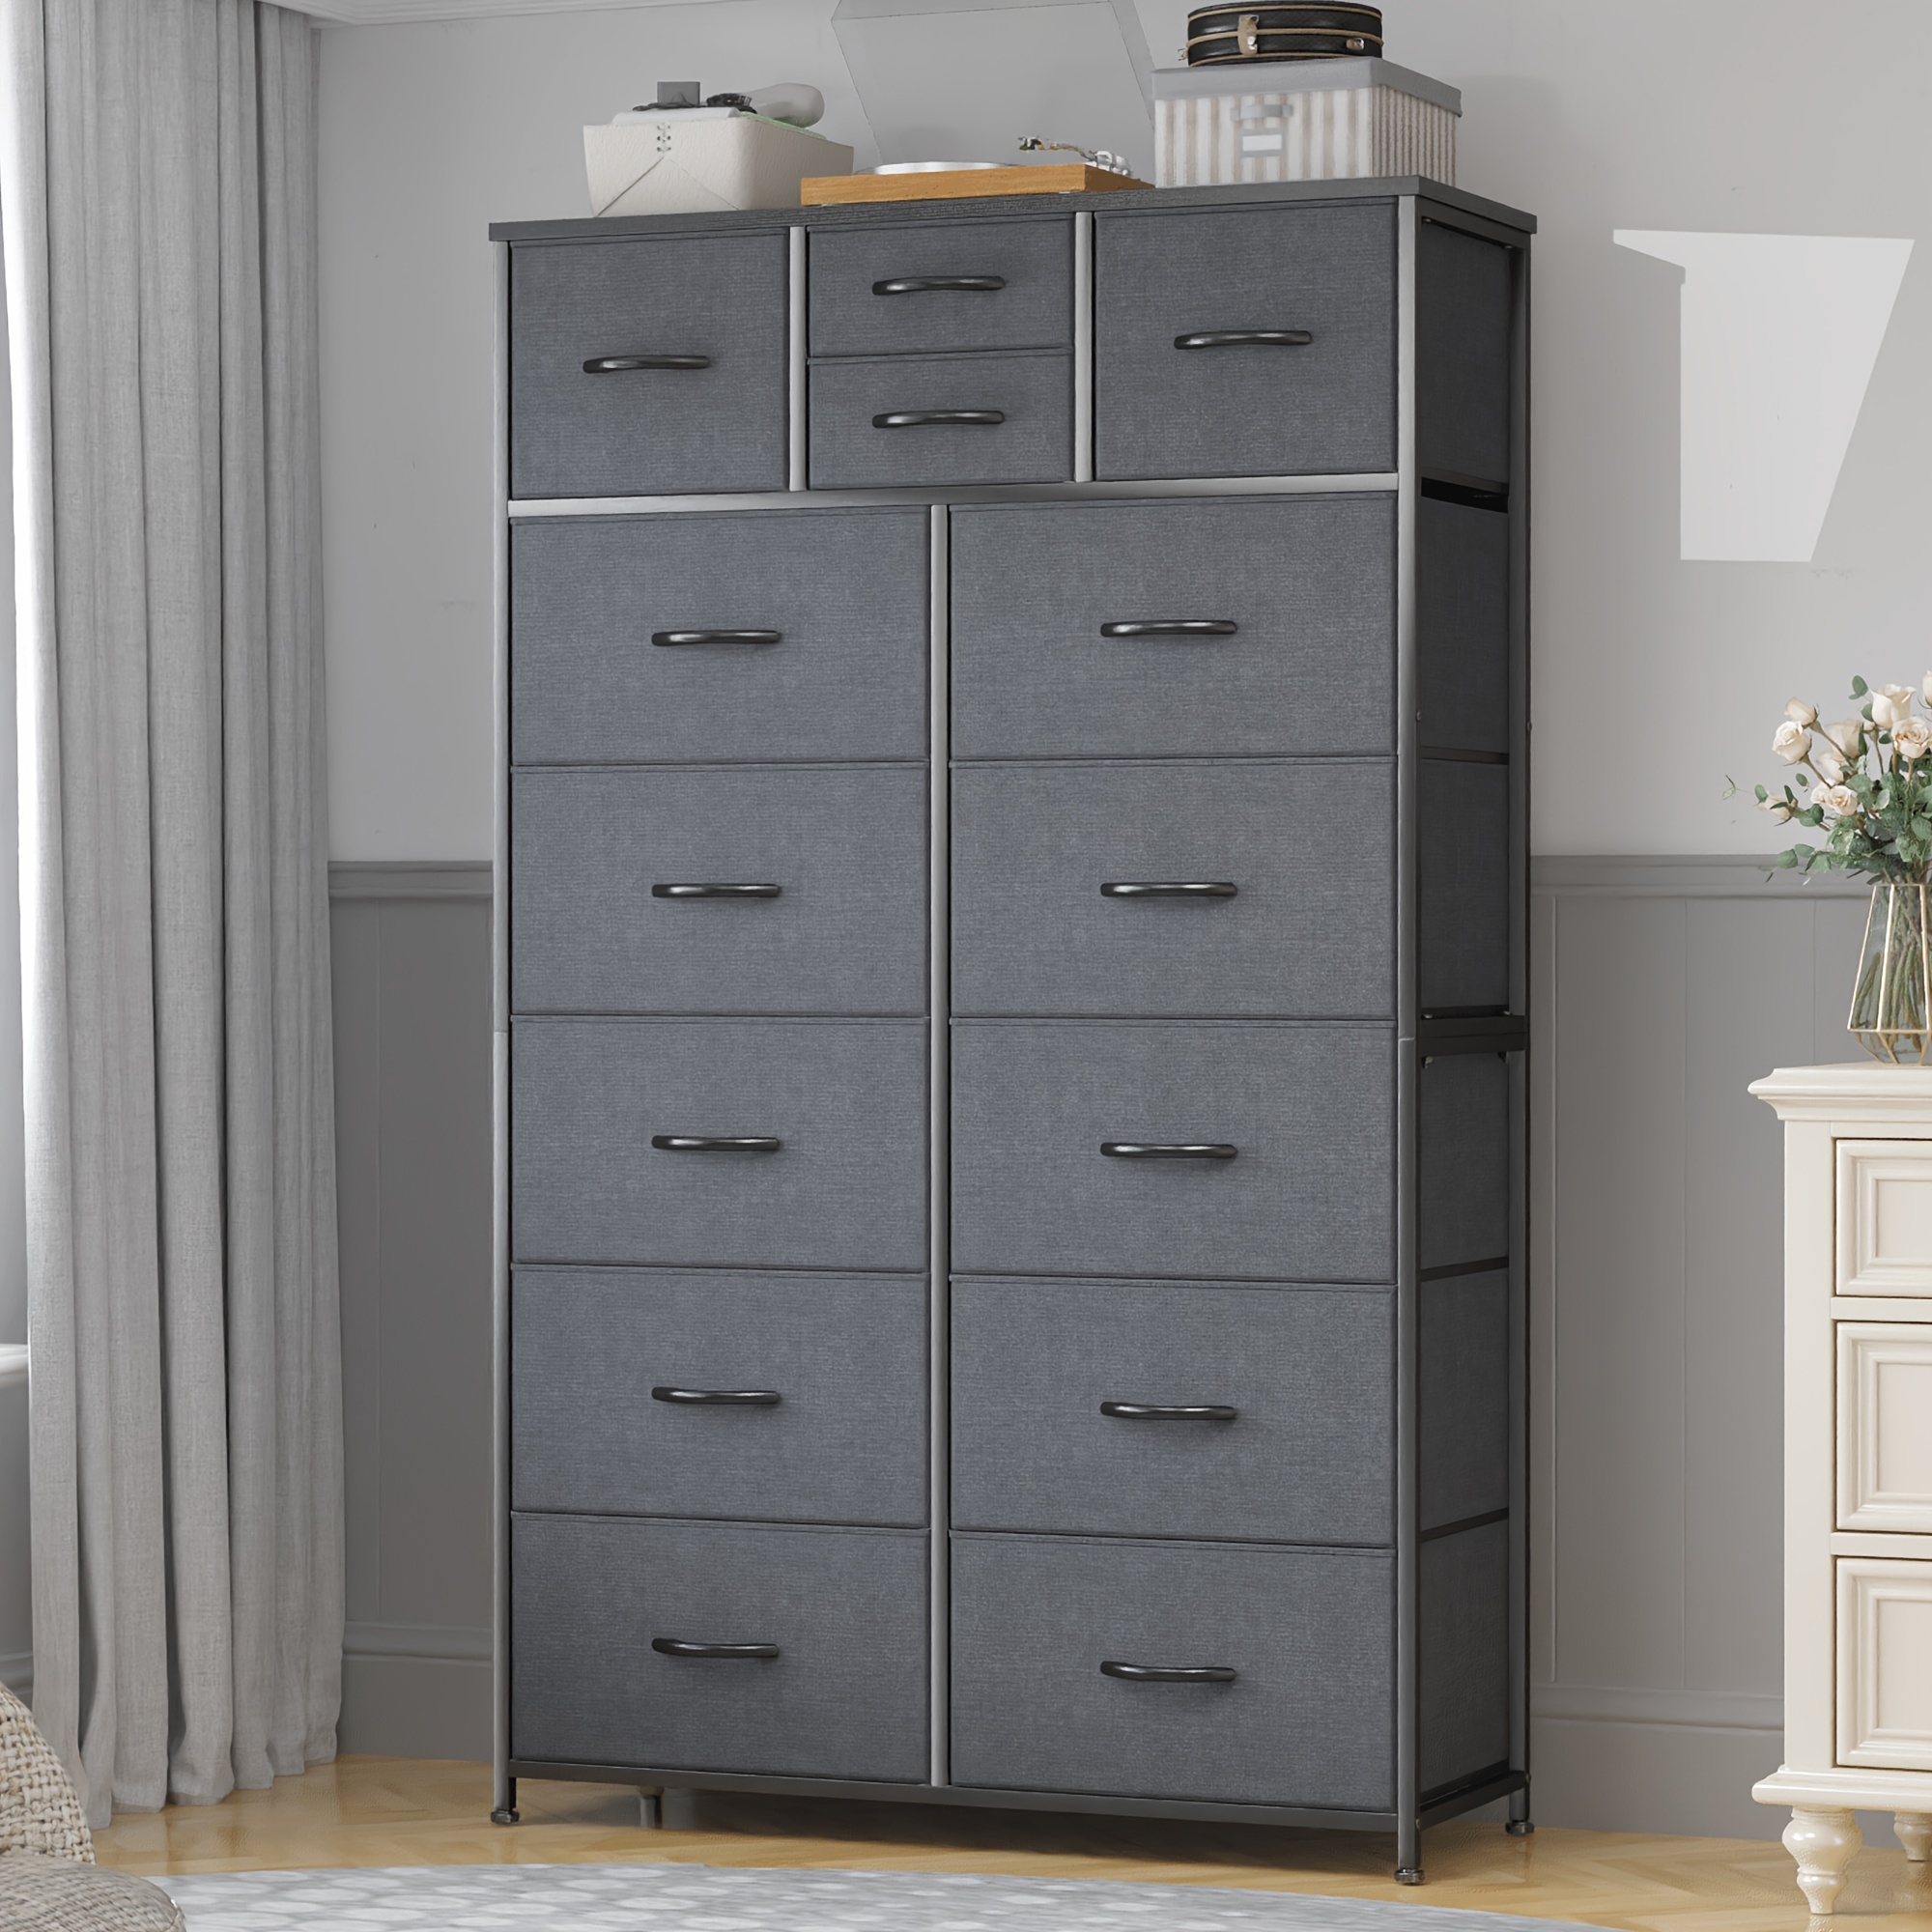 

14 Drawer Dresser, Tall Dressers & Chest Of Drawers, Fabric Dresser, Large Bedroom Dresser For Bedroom, Closets, Living Room, Entryway, Wooden Top, Metal Frame, 52.2"h X 37.4"w X 11.8"d, Grey